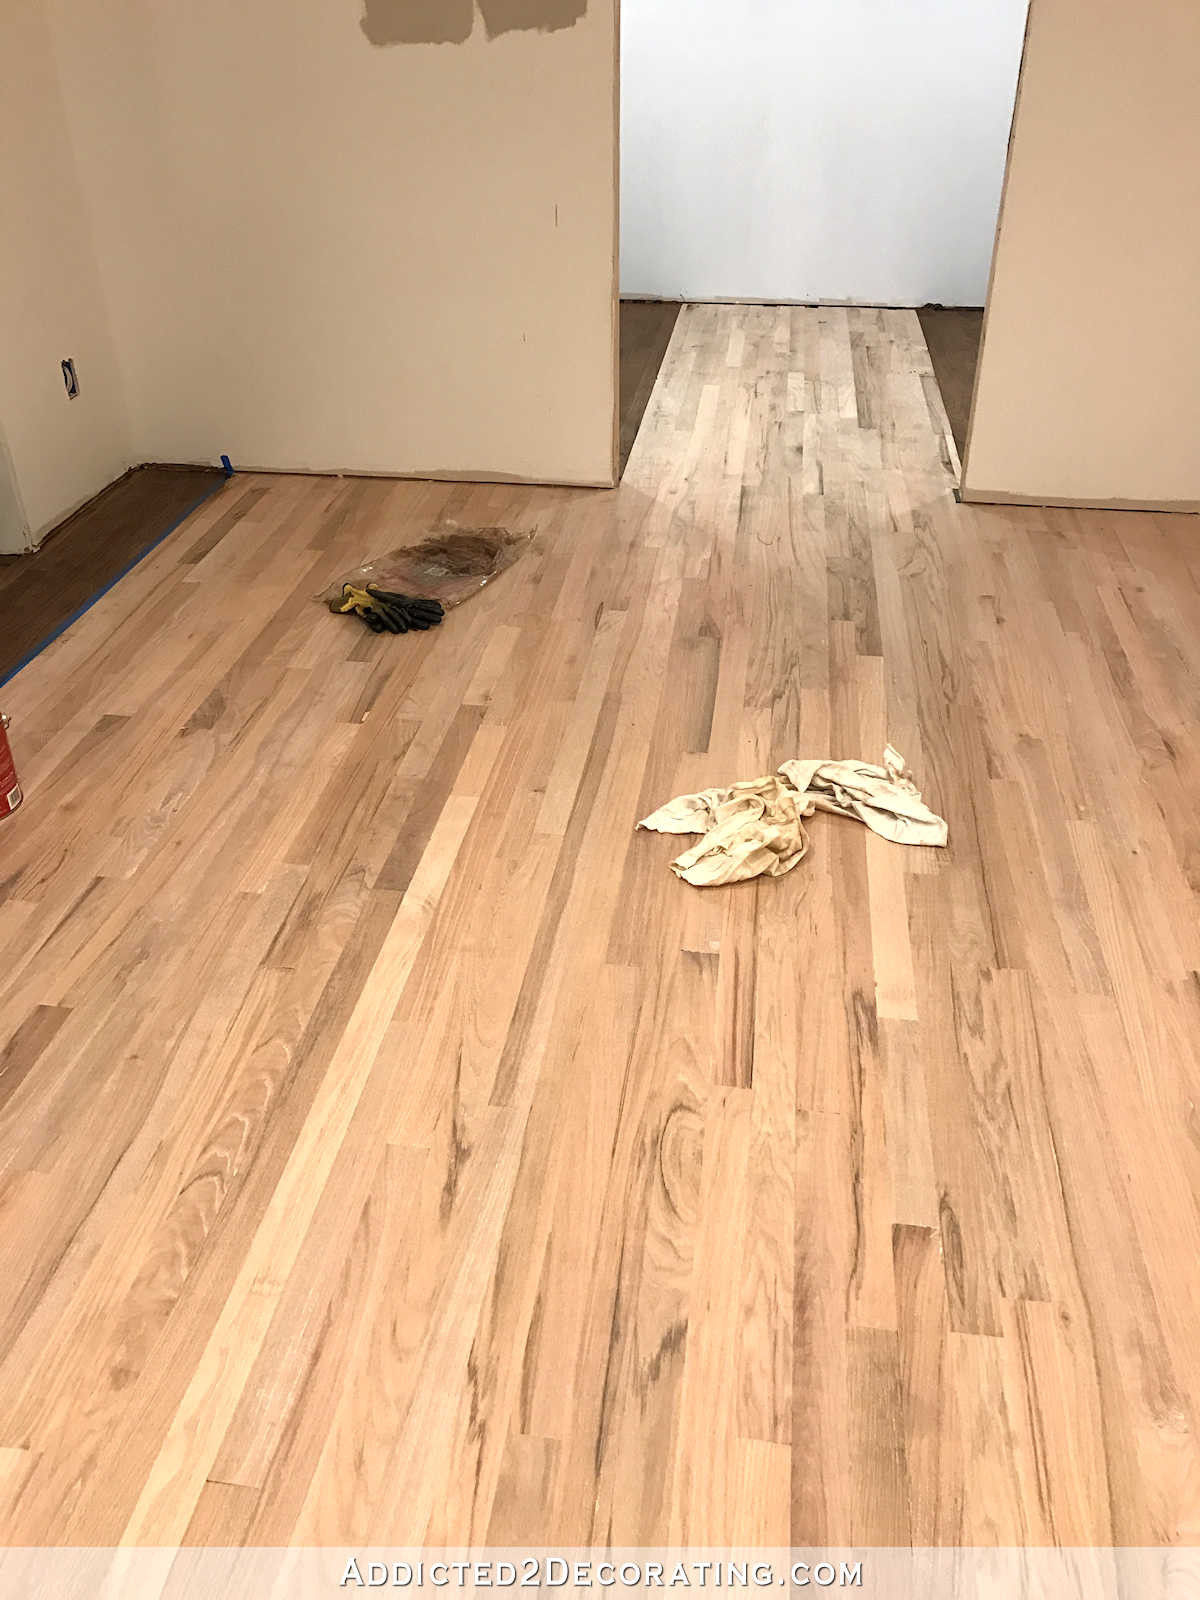 Warm Hardwood Floor Colors Of Adventures In Staining My Red Oak Hardwood Floors Products Process Pertaining to Staining Red Oak Hardwood Floors 12 Breakfast Room and Center Of Pantry Left to